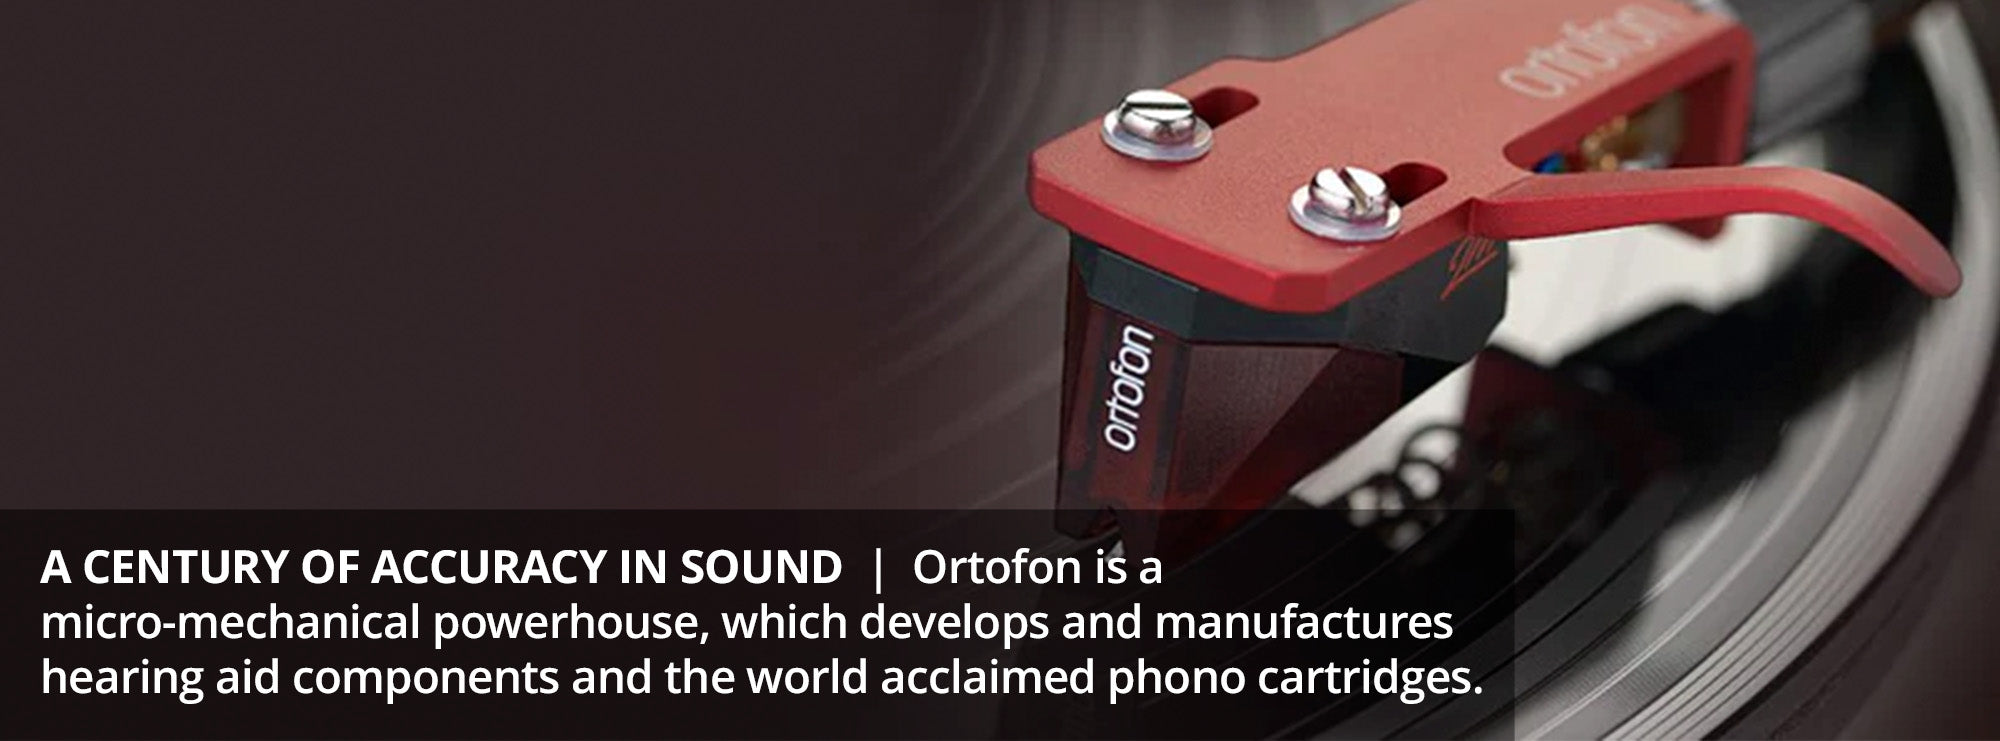 A century of accuracy in sound  Ortofon is a micro-mechanical powerhouse, which develops and manufactures hearing aid components and the world acclaimed phono cartridges.